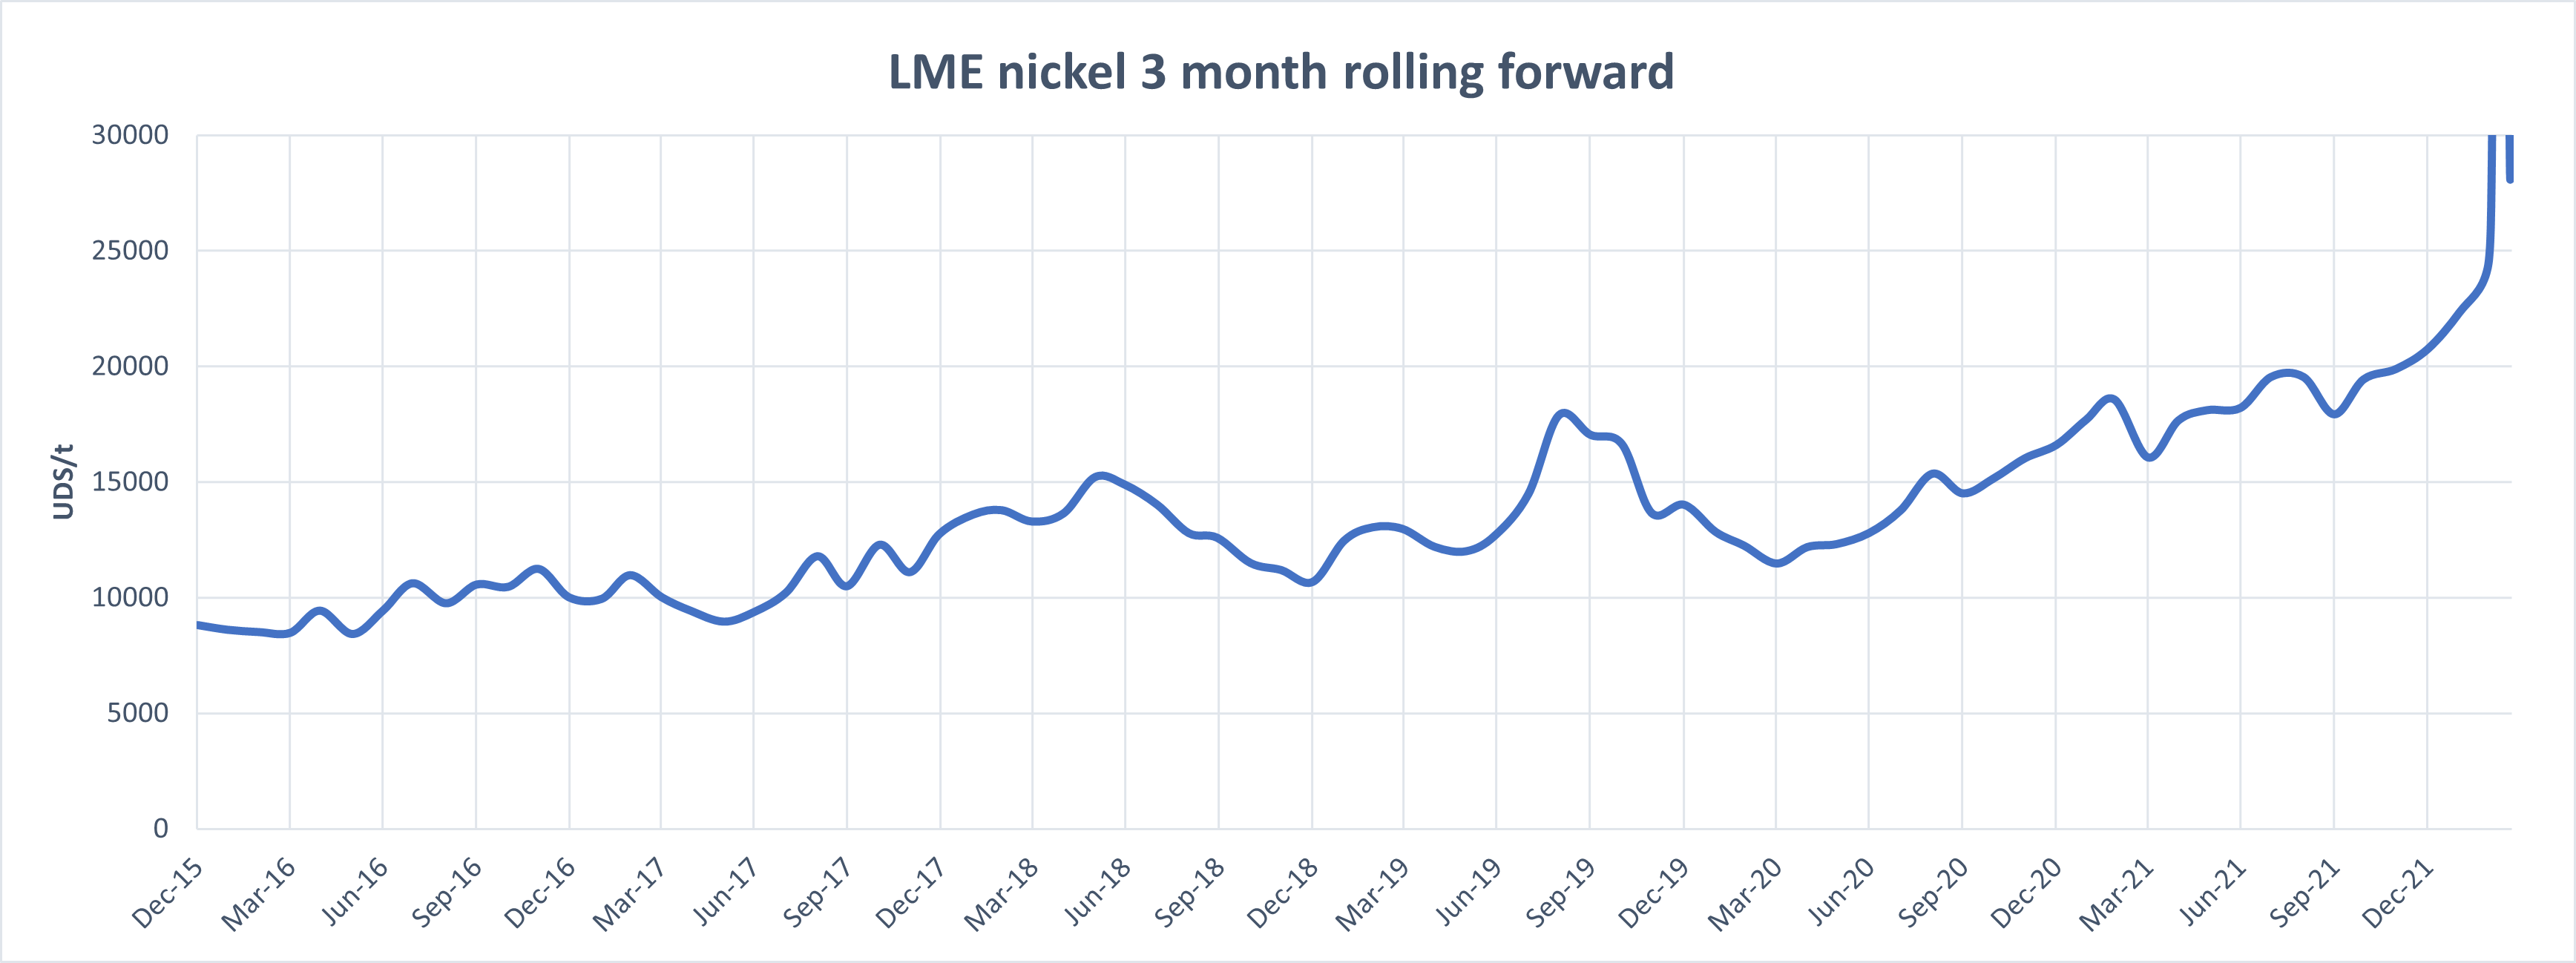 Nickel prices can fluctuate considerably